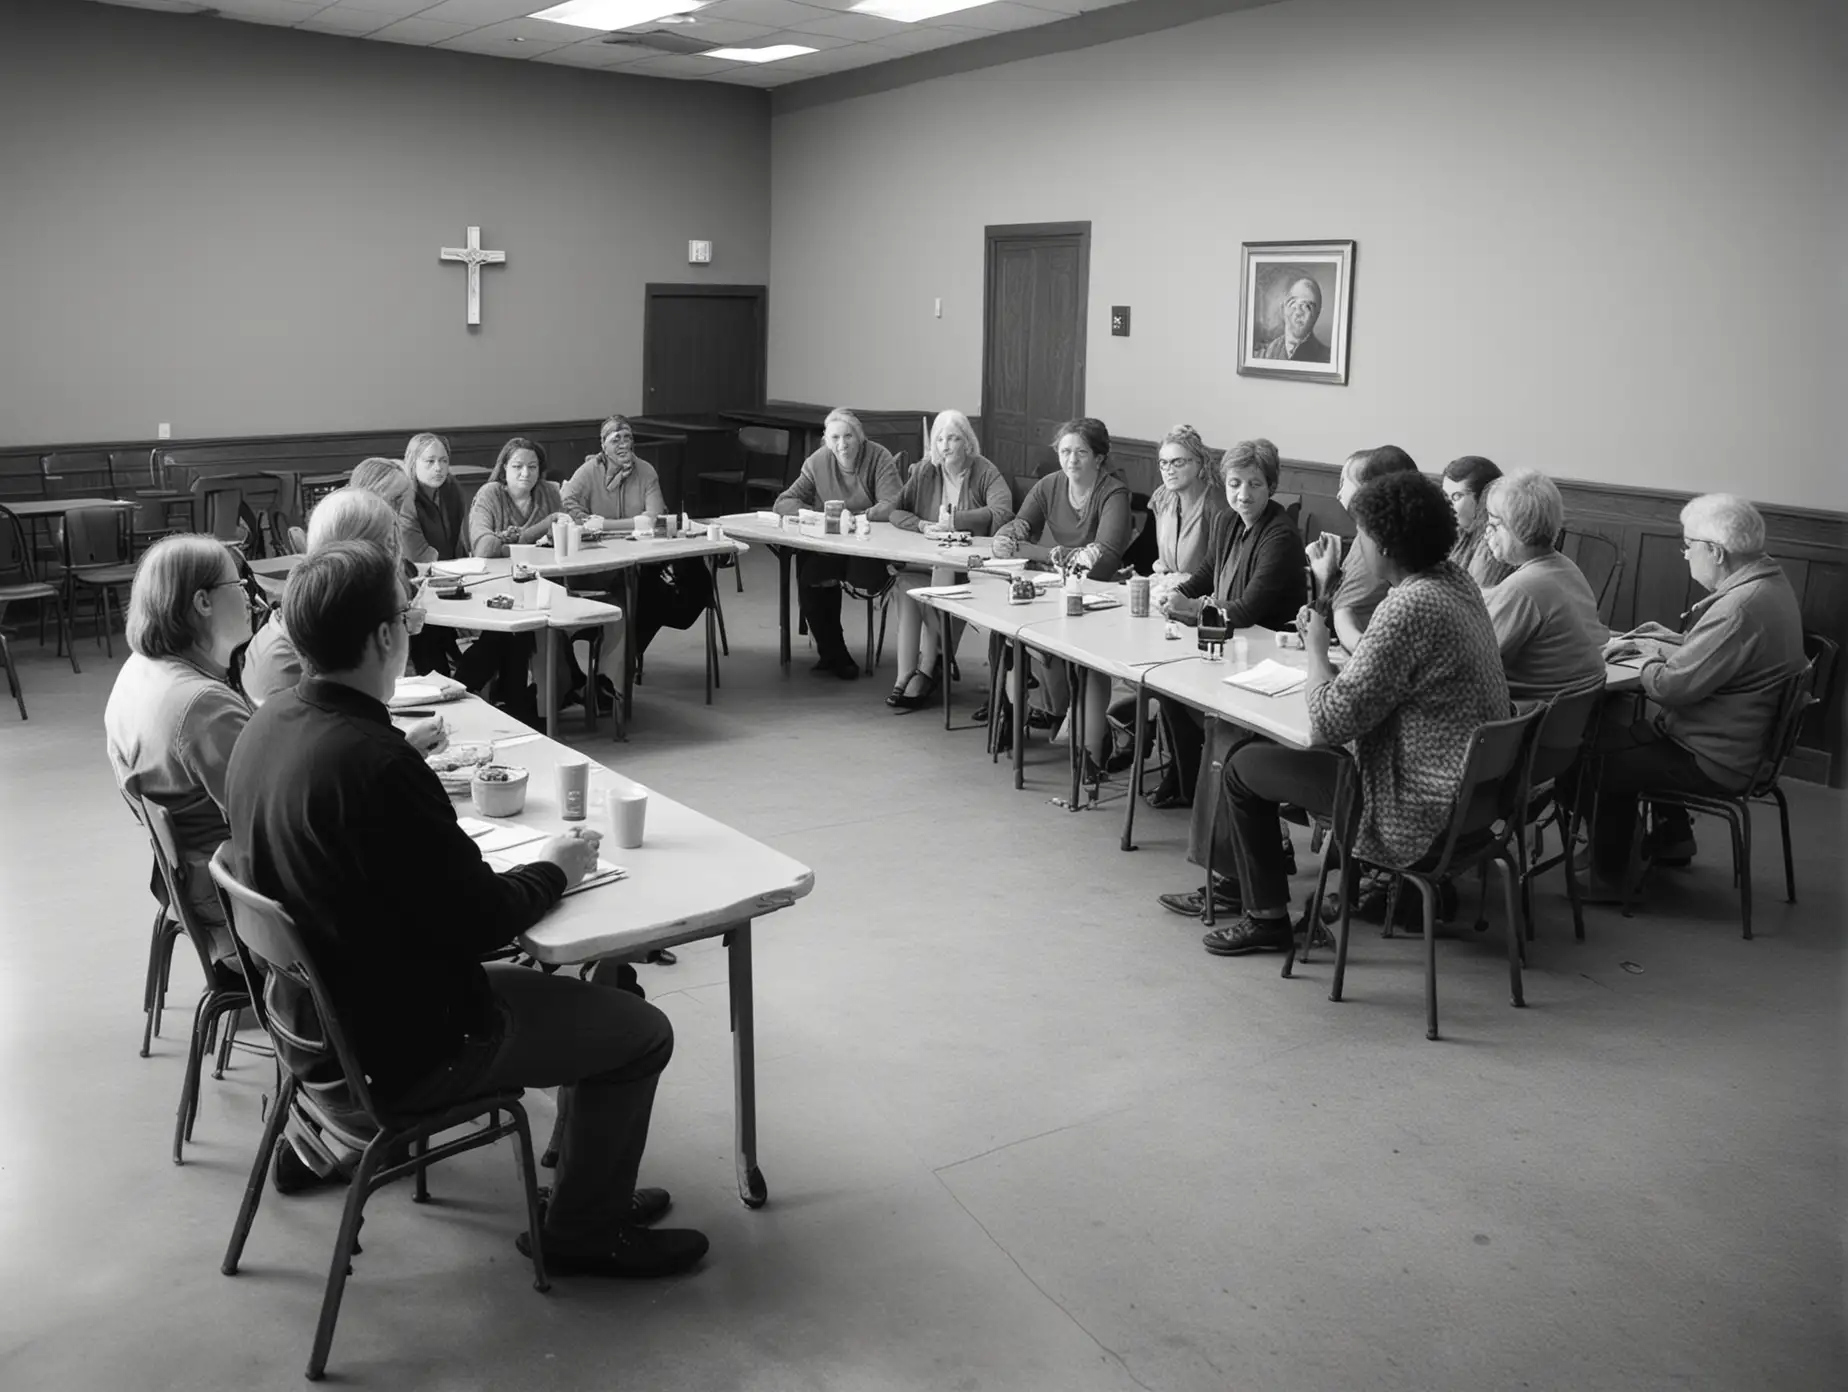 realistic black and white photograph of a ten-person focus group meeting in a church cafeteria